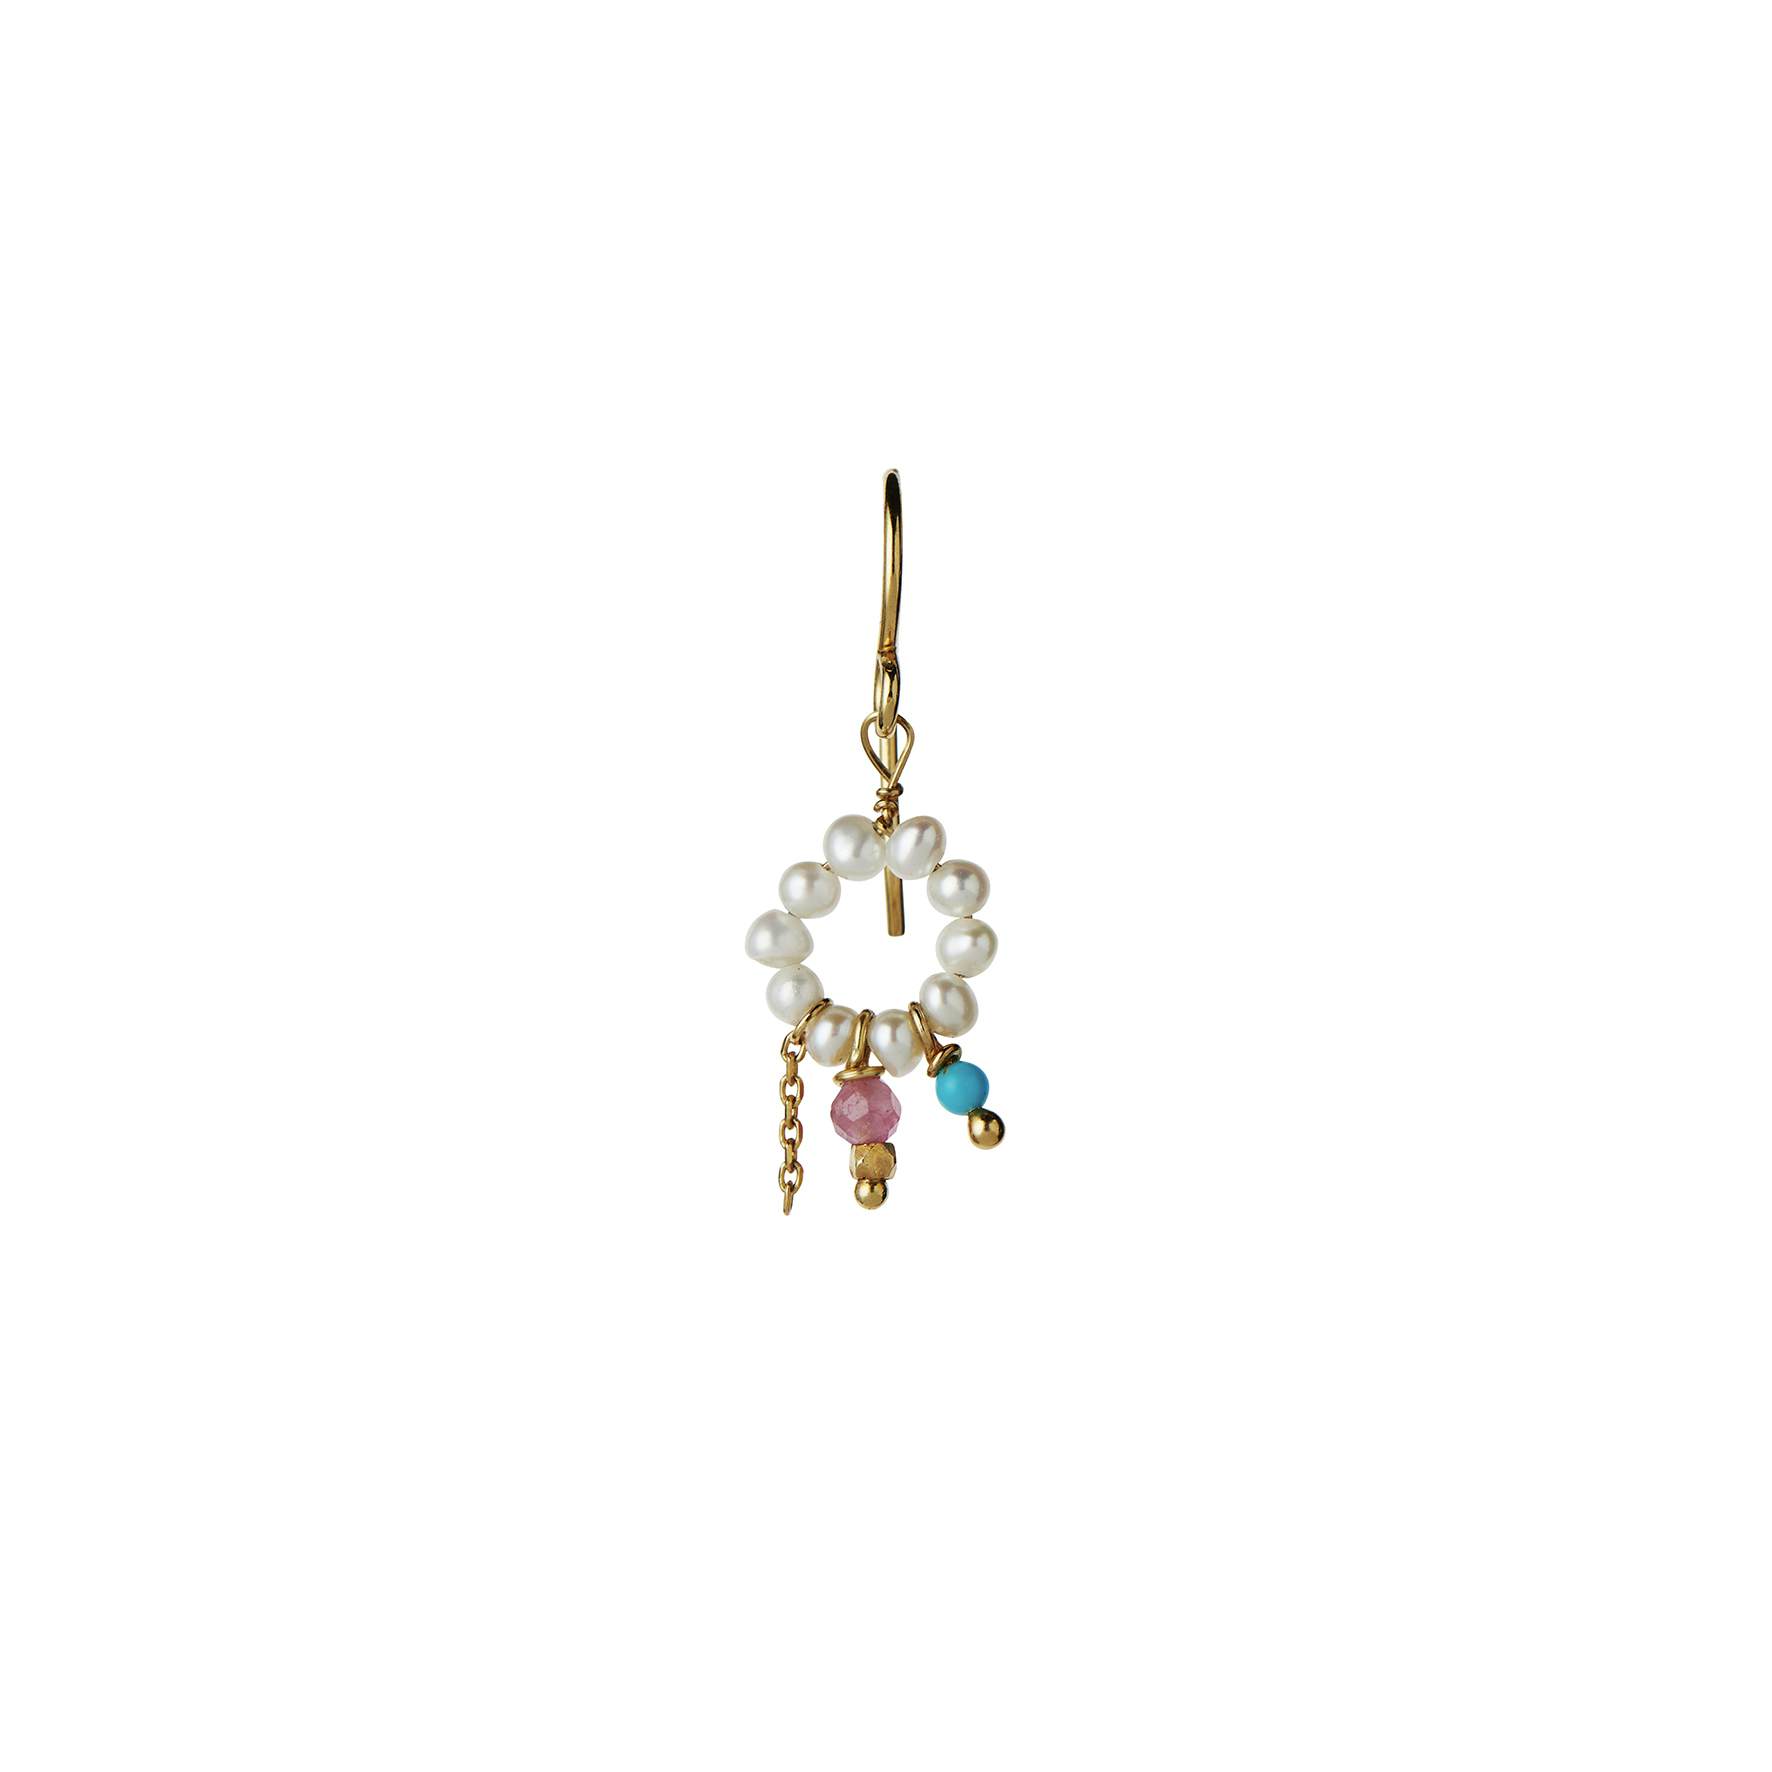 Petit Heavenly Pearl Dream Earring Turquoise & Pink Stones von STINE A Jewelry in Vergoldet-Silber Sterling 925